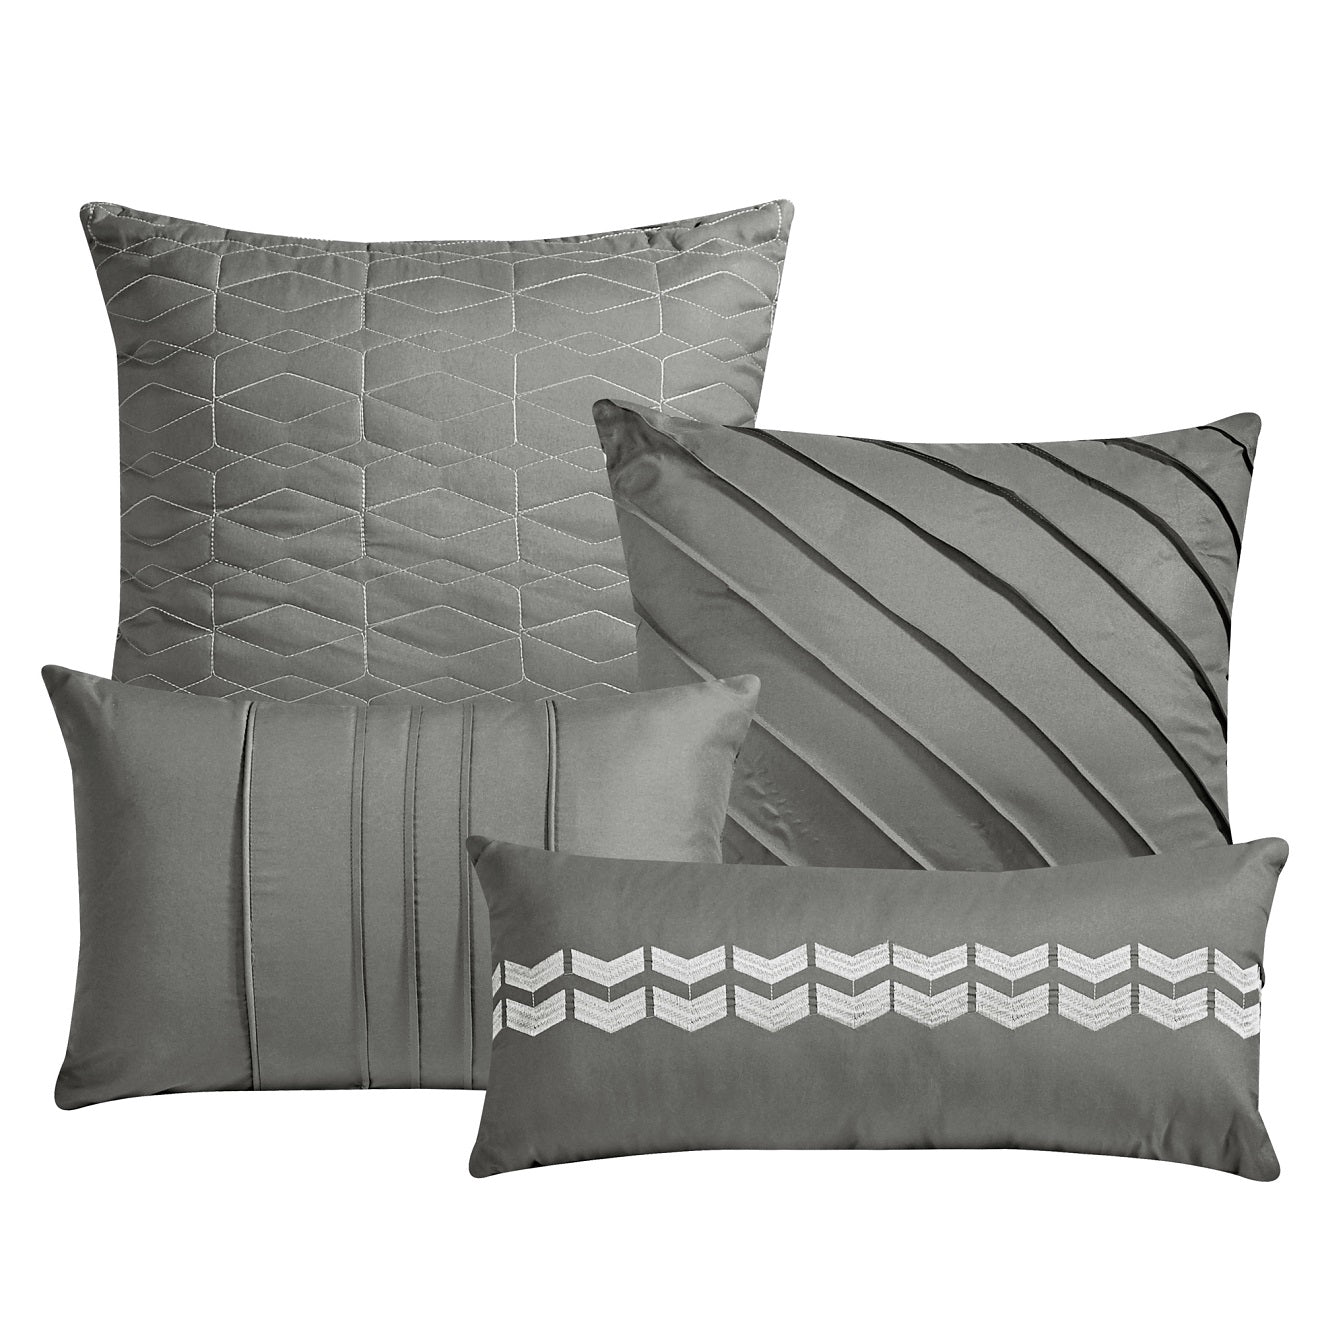 close up of the four pillow covers that come with the gray comforter set